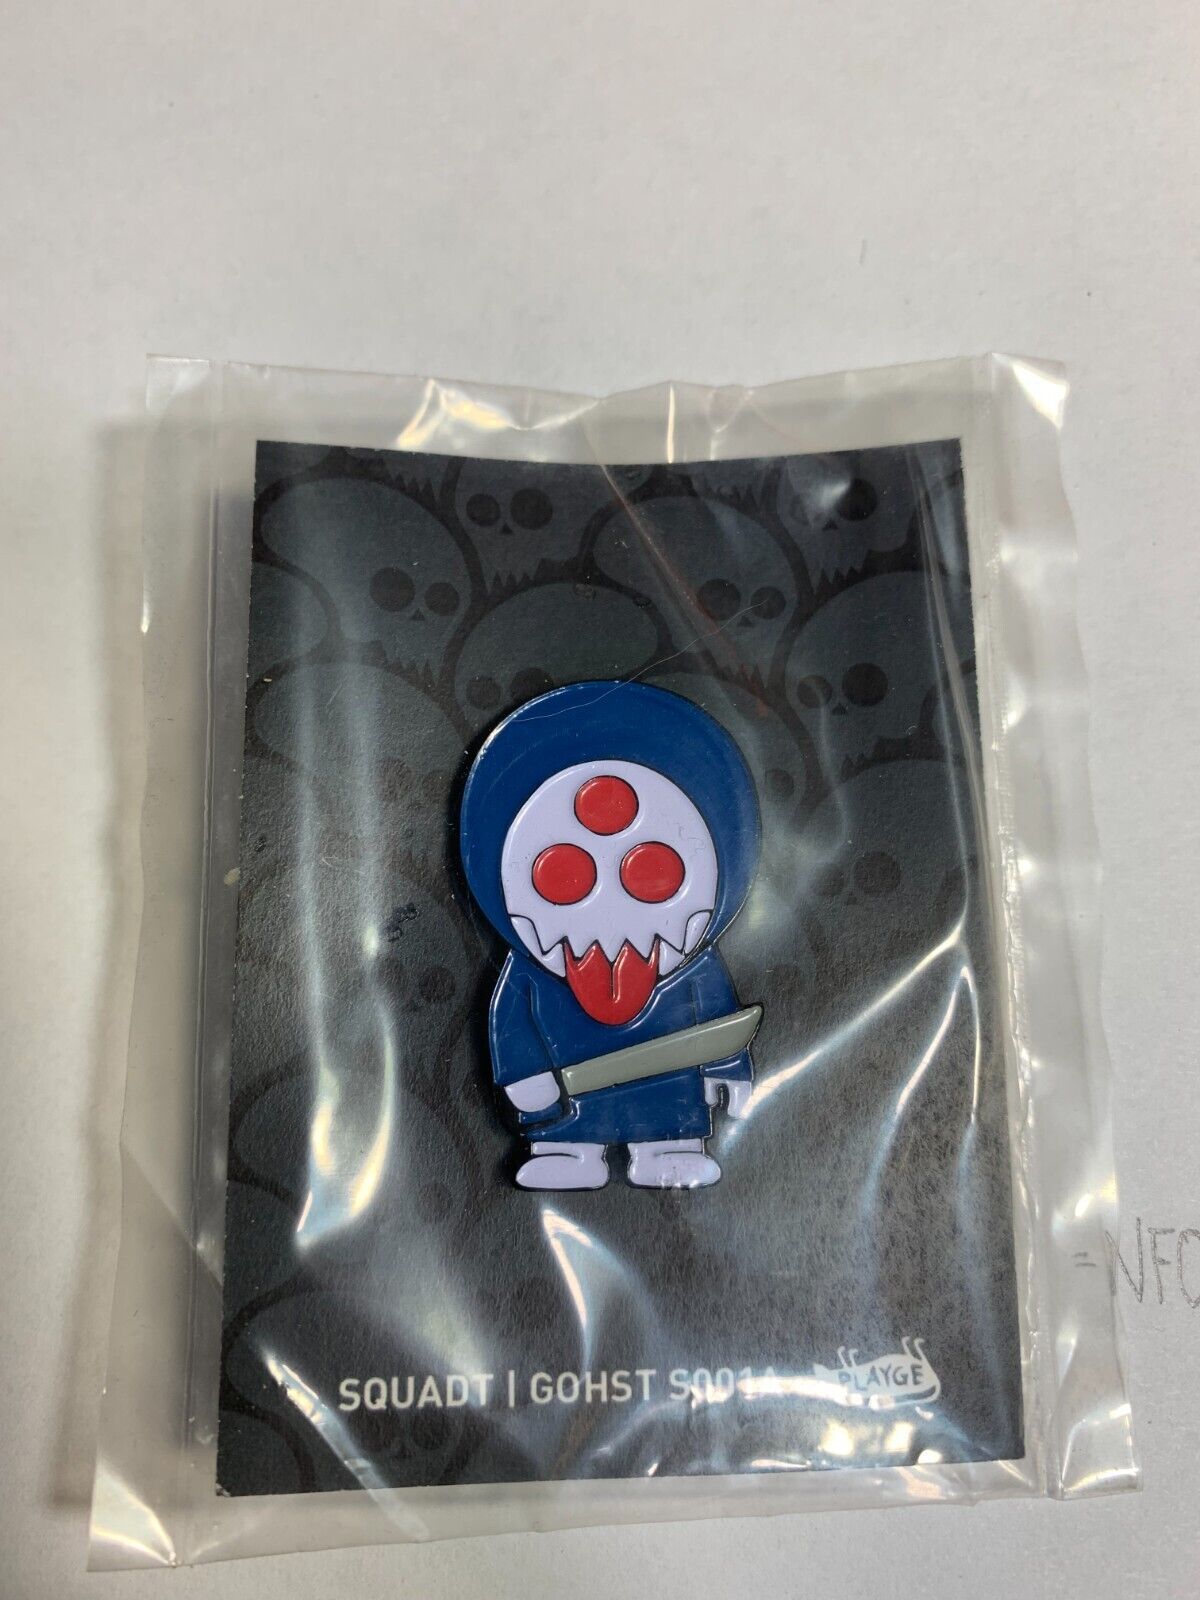 Playge Squadt - Gohst S001A - Signed Numbered #38 of 50 Enamel Pin Jamungo Ferg